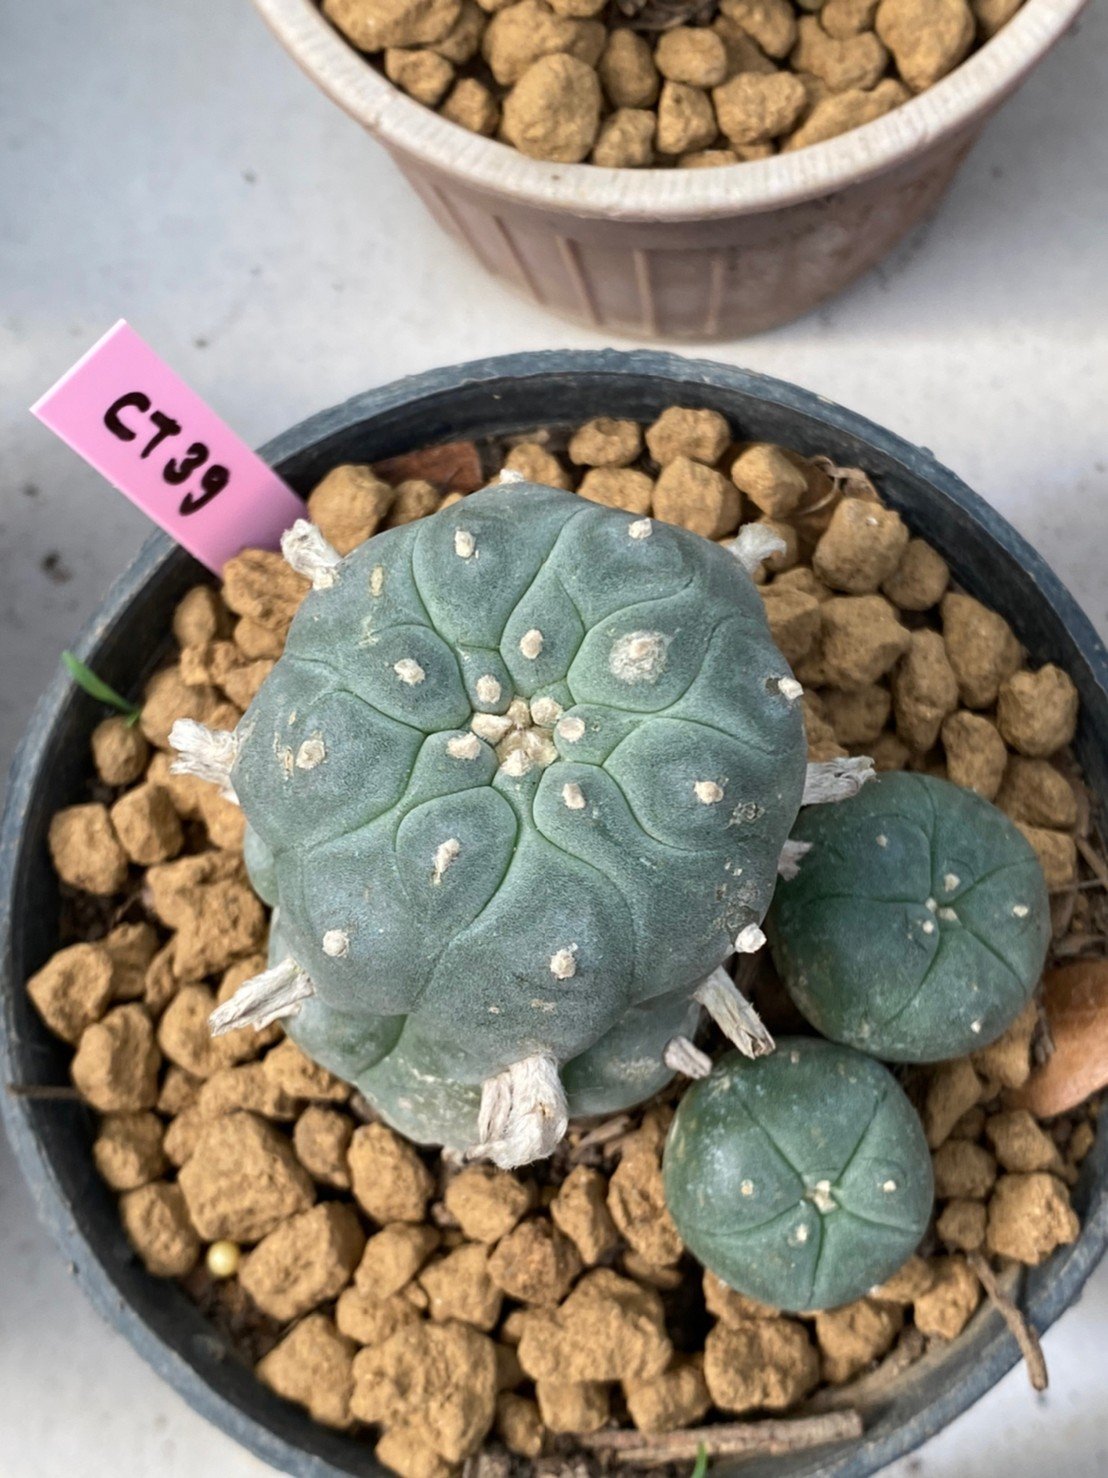 Lophophora williamsii 6 cm 10 years old ownroot grow from seed from Japan